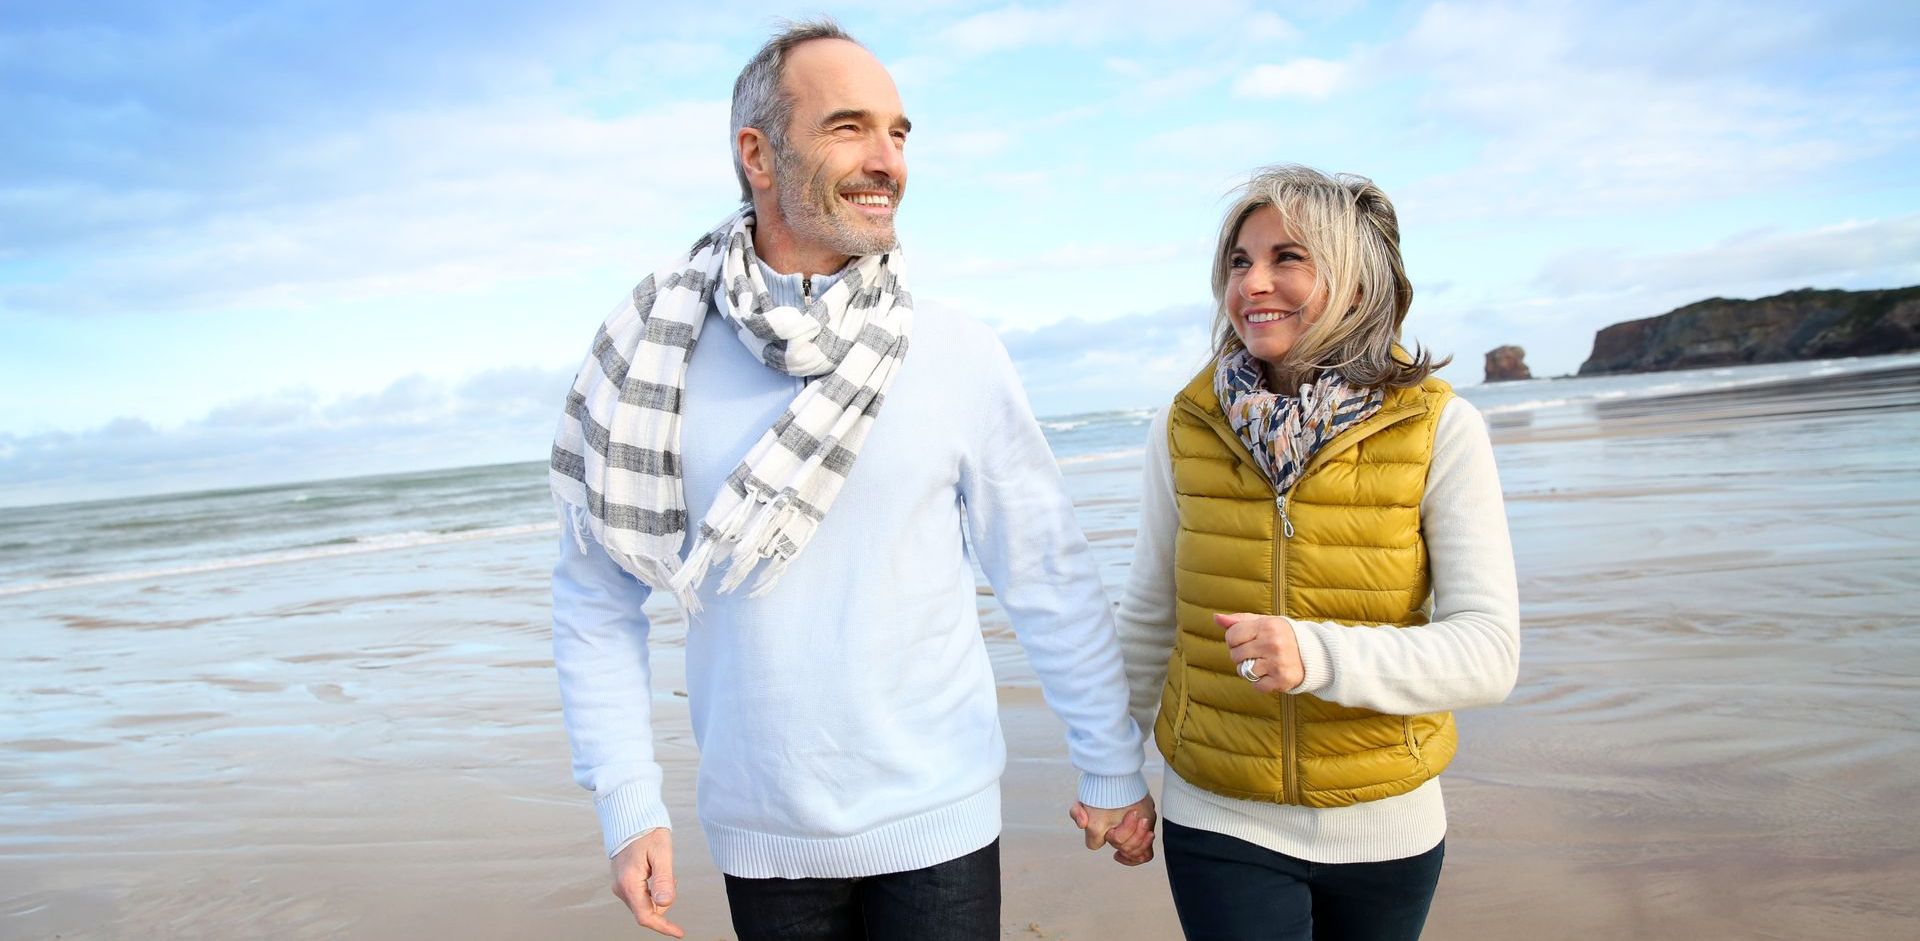 Man and woman are walking on the beach. PRP injectables use your own platelets to repair and restore your body’s own ability to grow hair. Stop covering up your hair loss and fully reverse it under the care of our expert medical team. Get hair growth treatments right here in our Villanova medical suite.